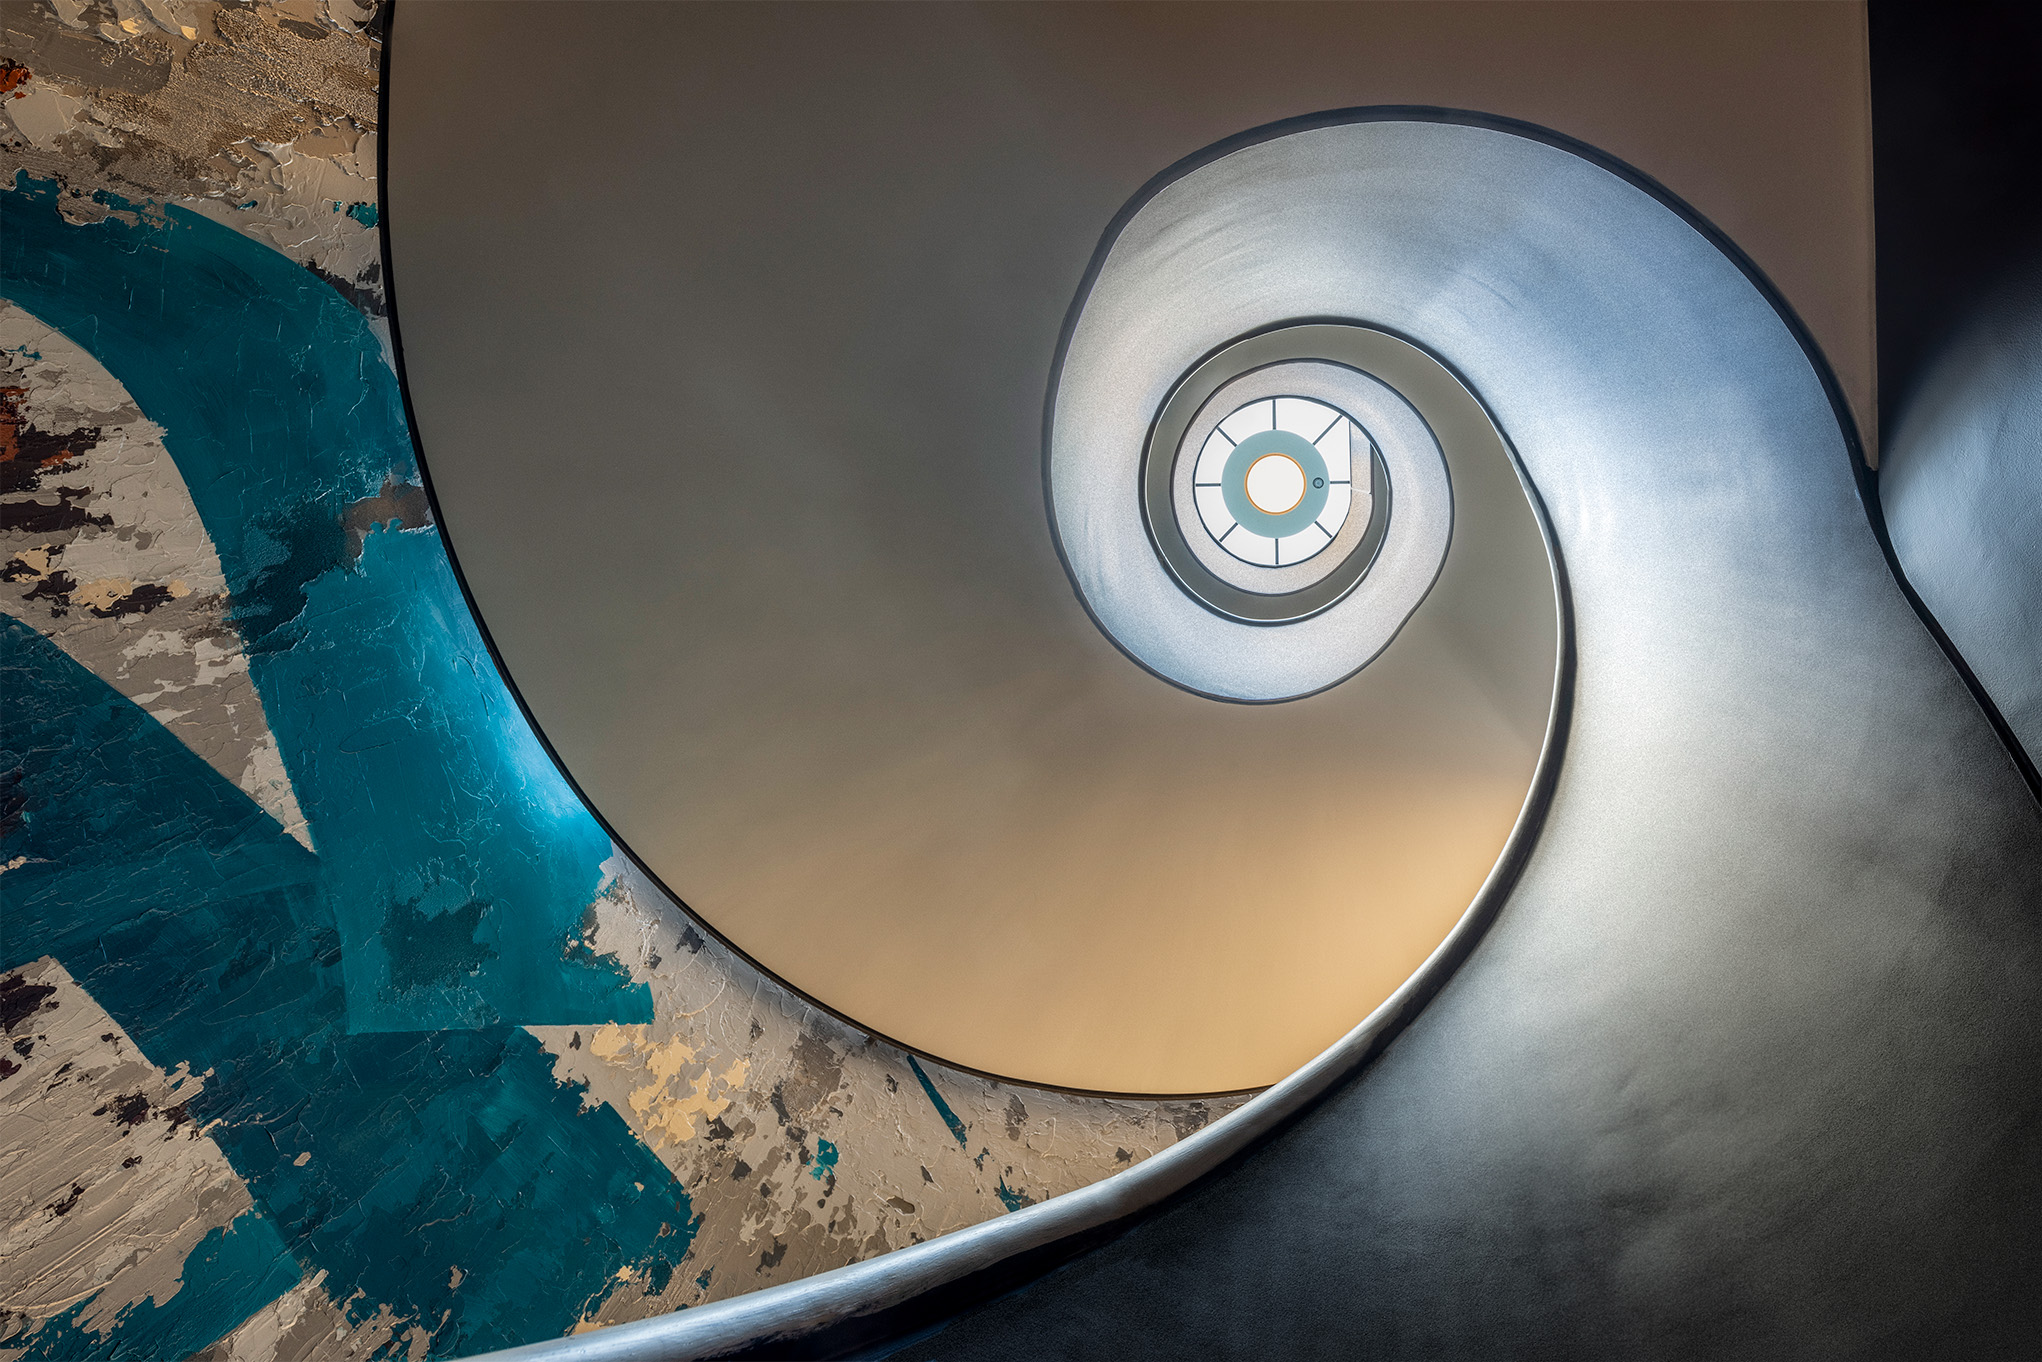 Dirk Lindner won Best Photograph Award for his interior view of the ‘rotunda’ stair, which is adorned with 11-metre high mural painted by Shahzrad Ghaffari.